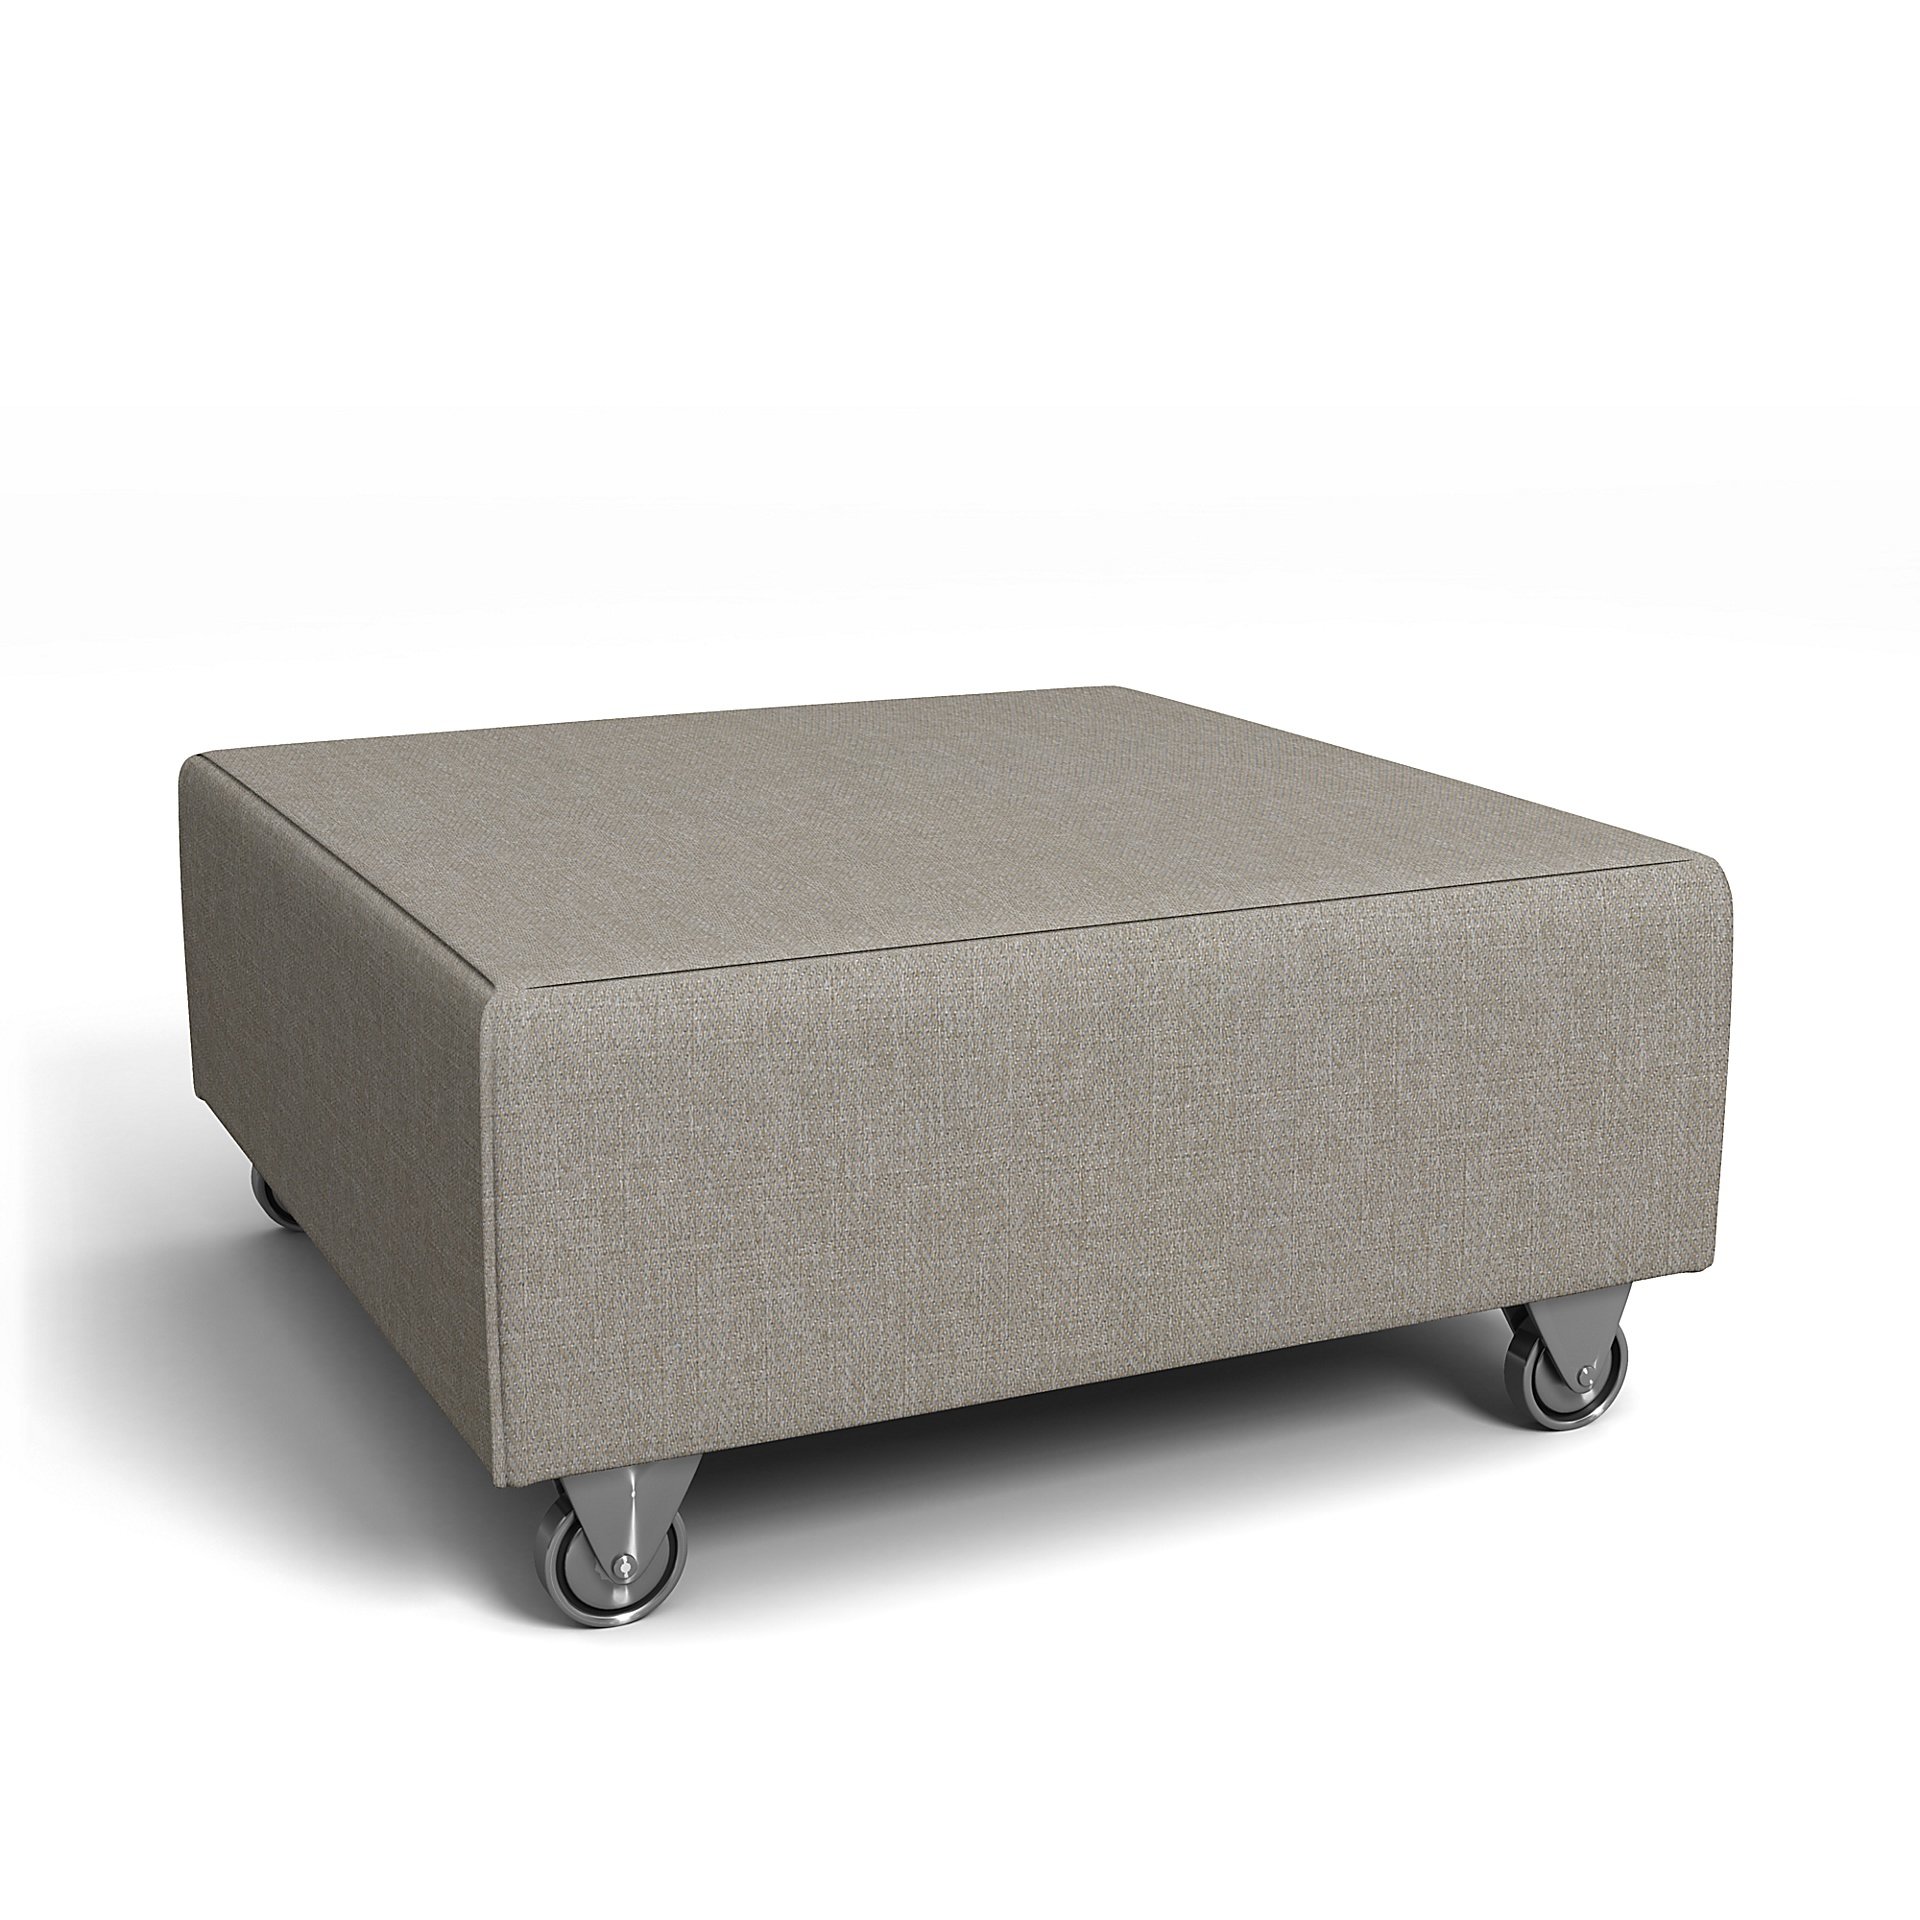 IKEA - Falsterbo Footstool Cover, Greige, Boucle & Texture - Bemz